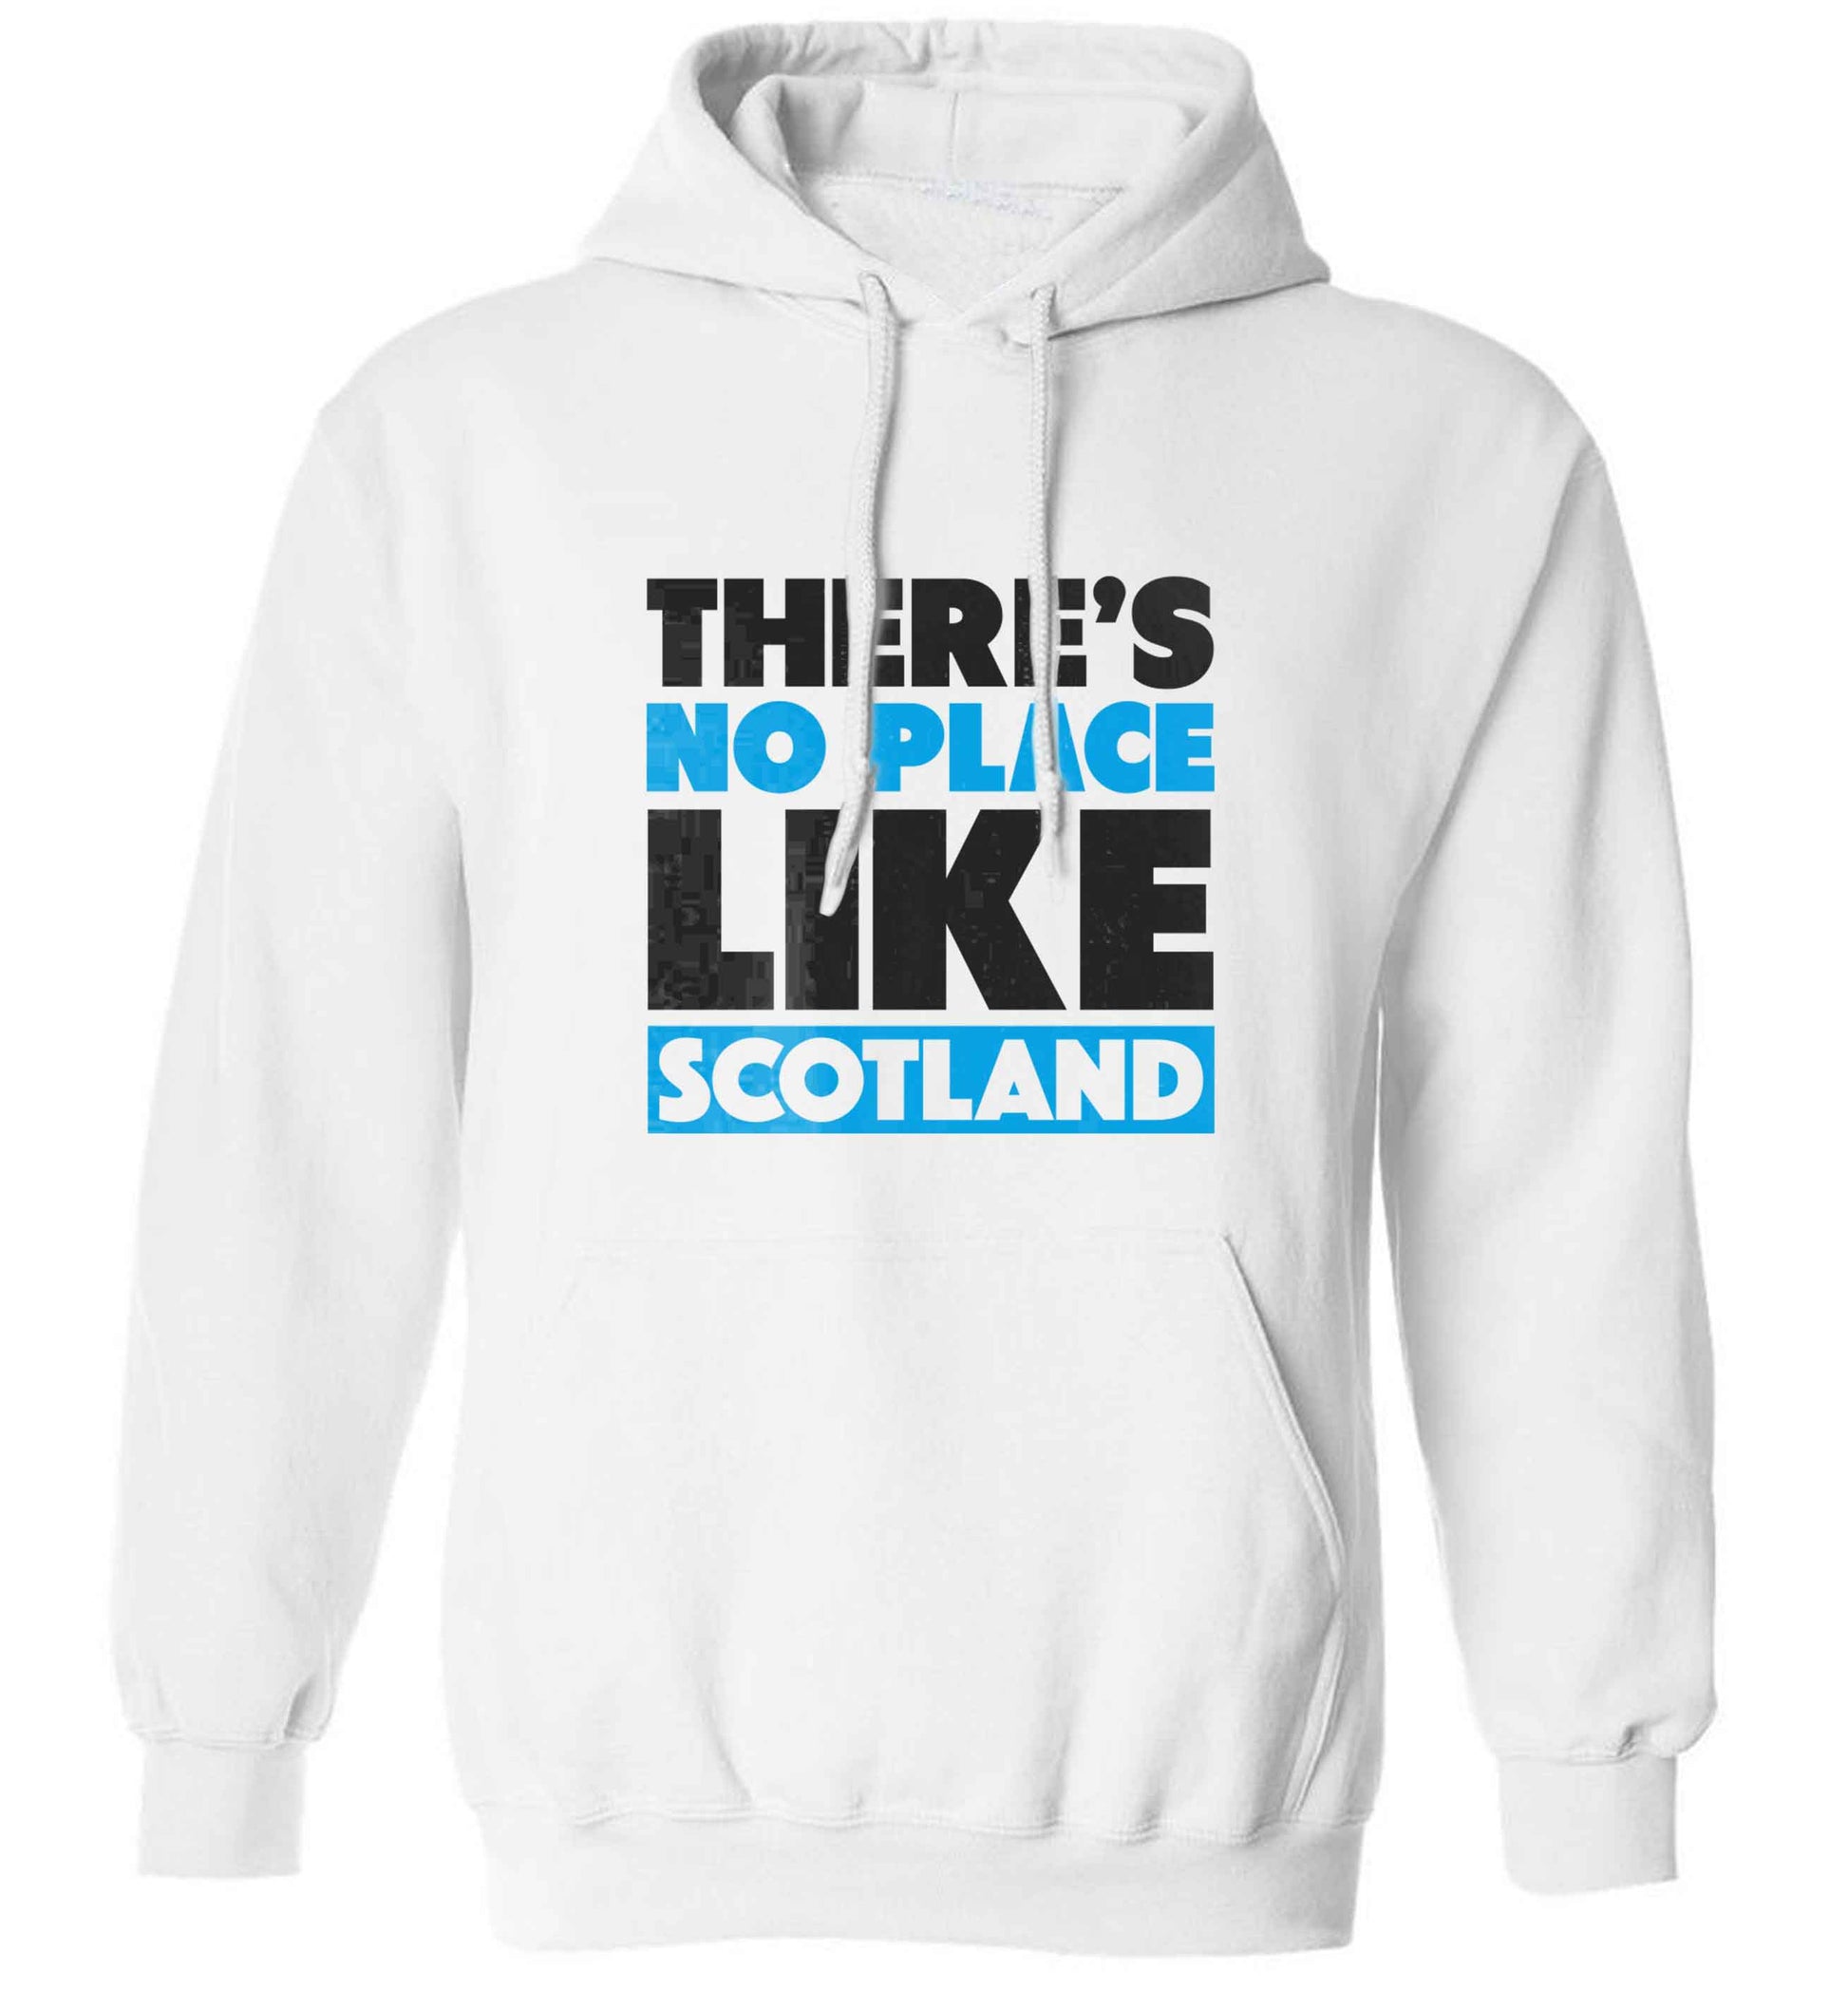 There's no place like Scotland adults unisex white hoodie 2XL